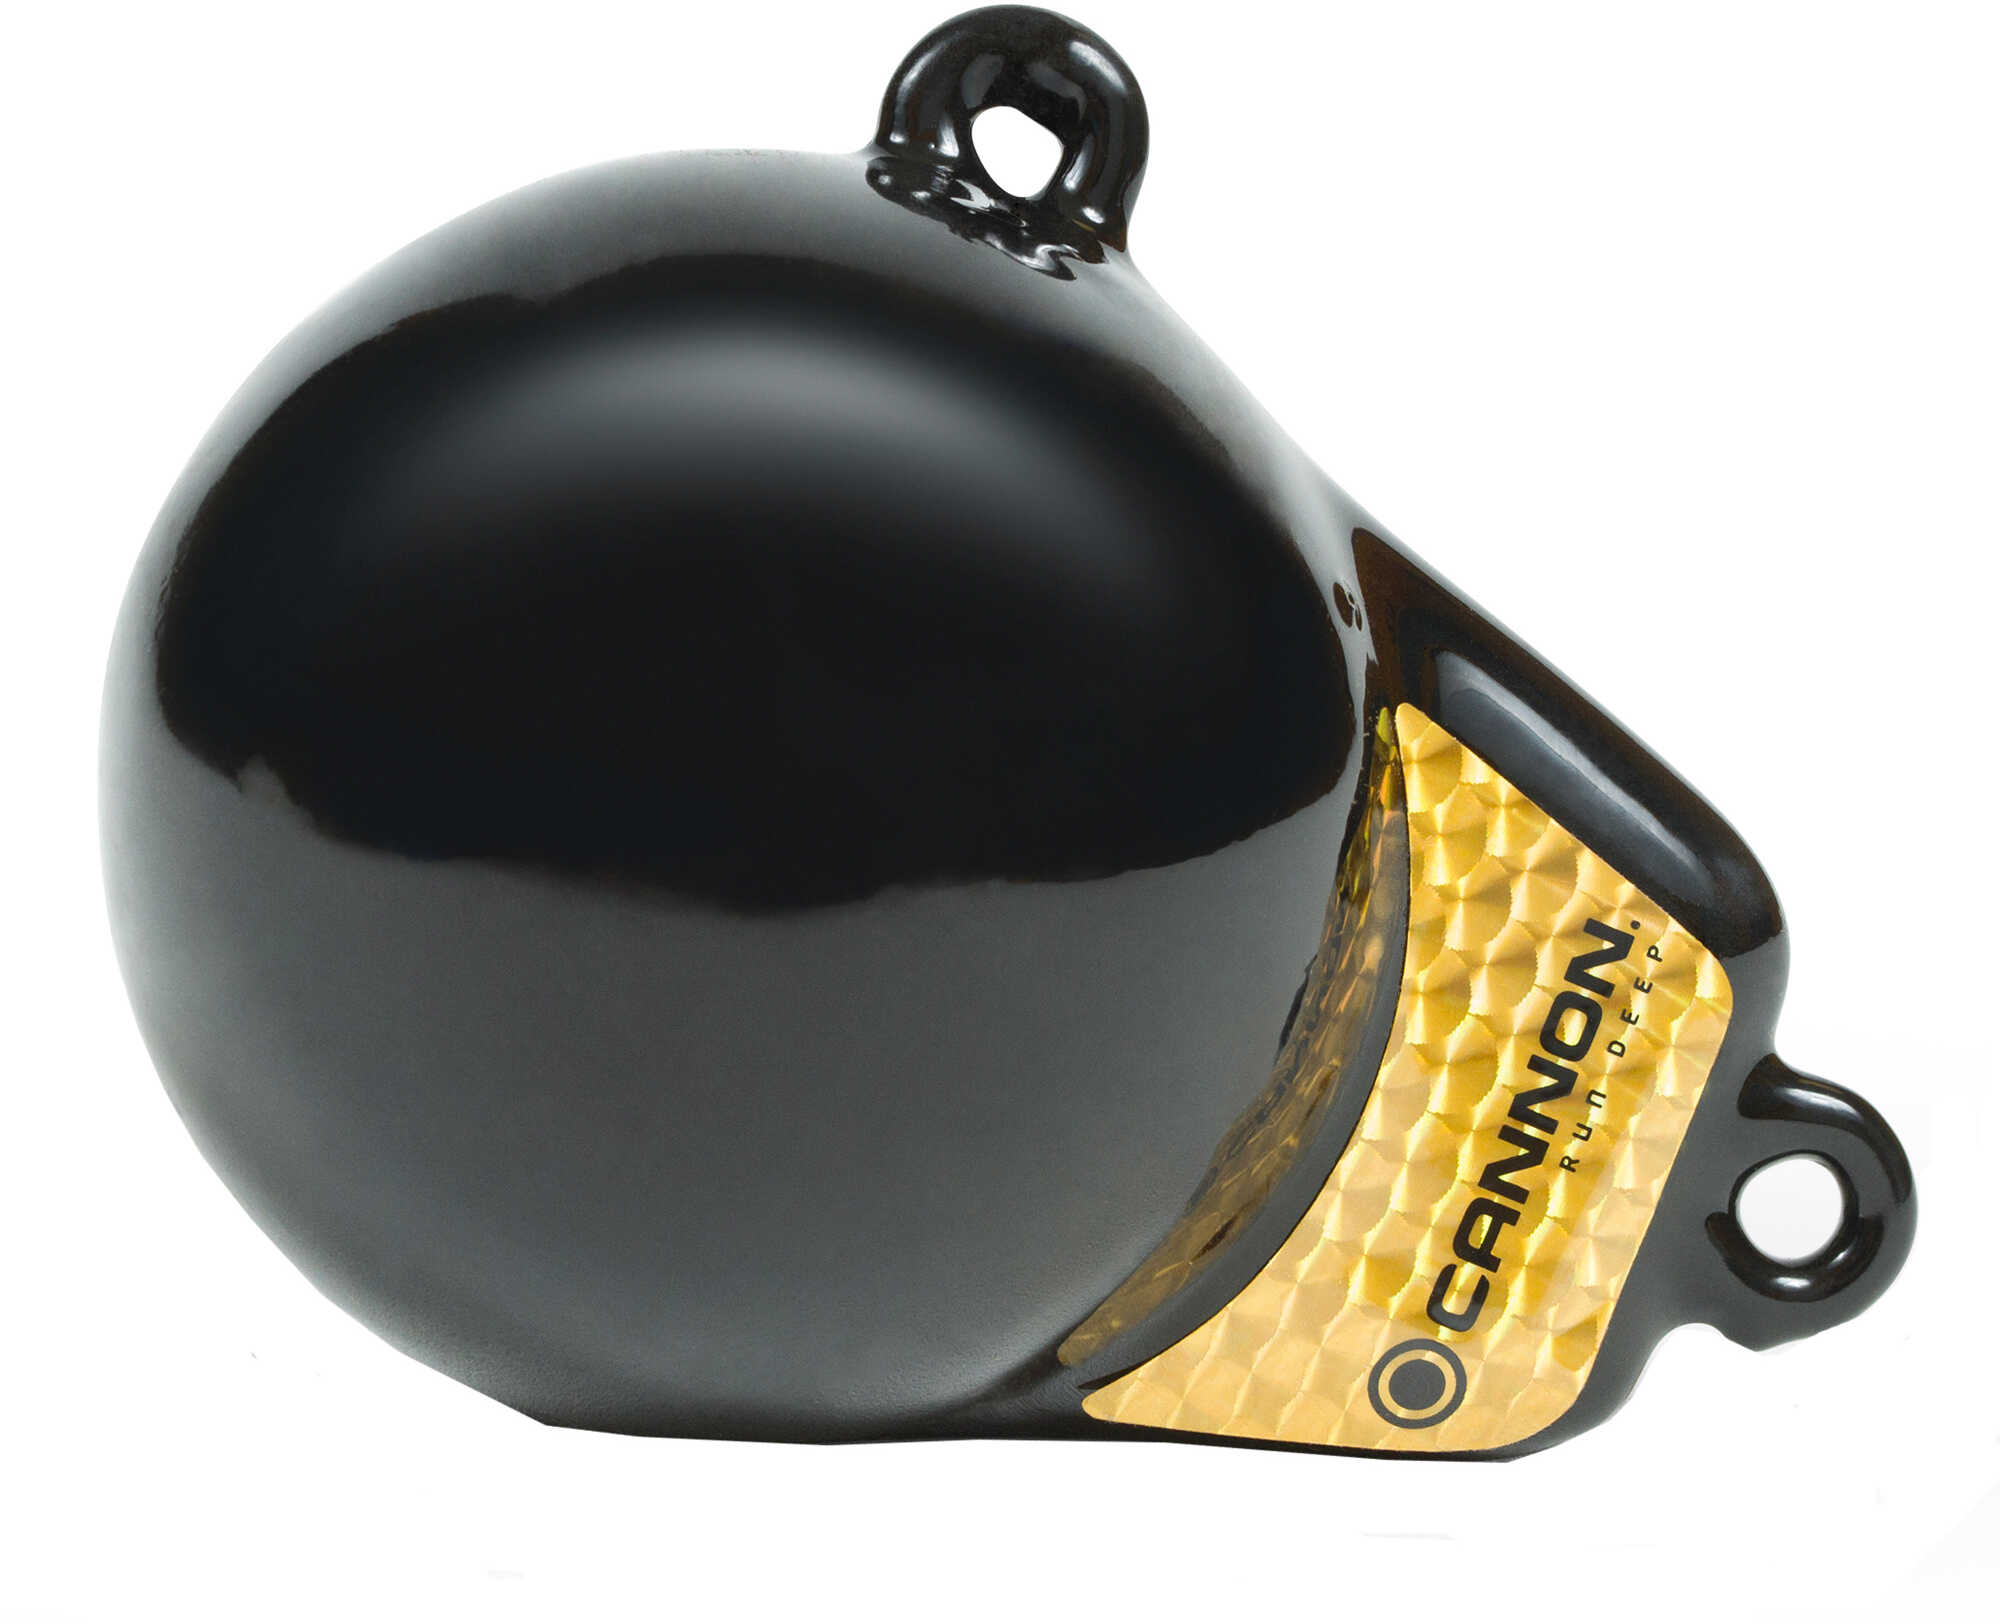 Cannon Downriggers Flash Weight, 6 Pounds Md: 2295180